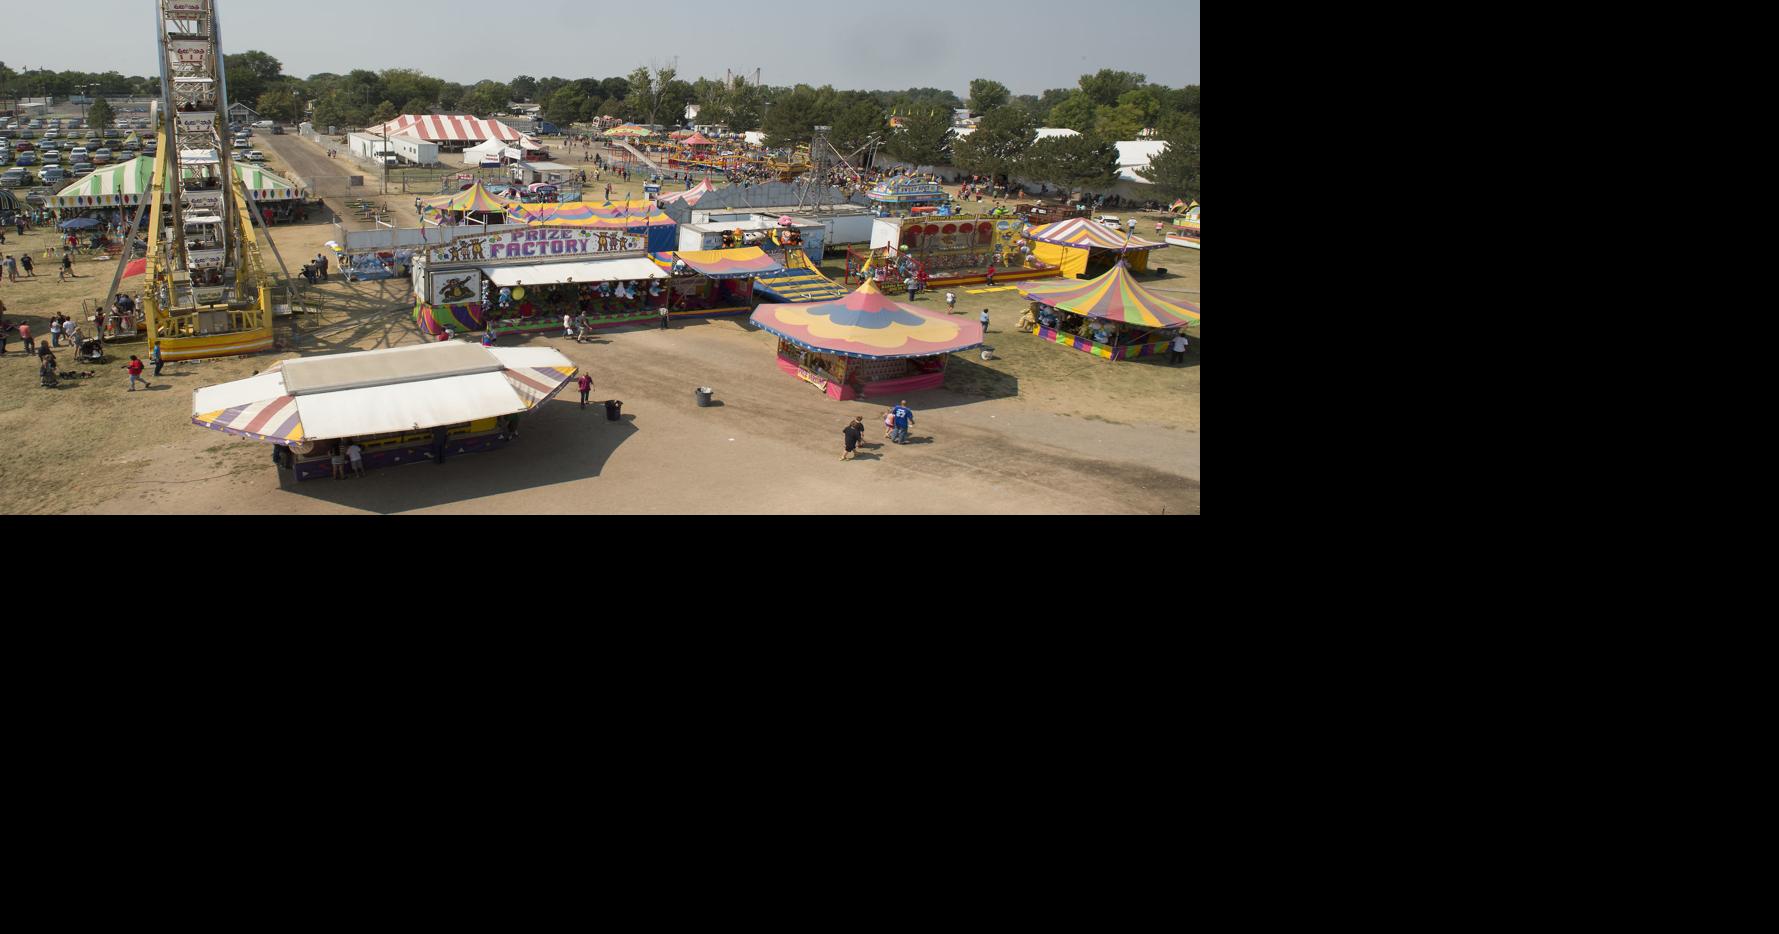 8 things to do at the Twin Falls County Fair